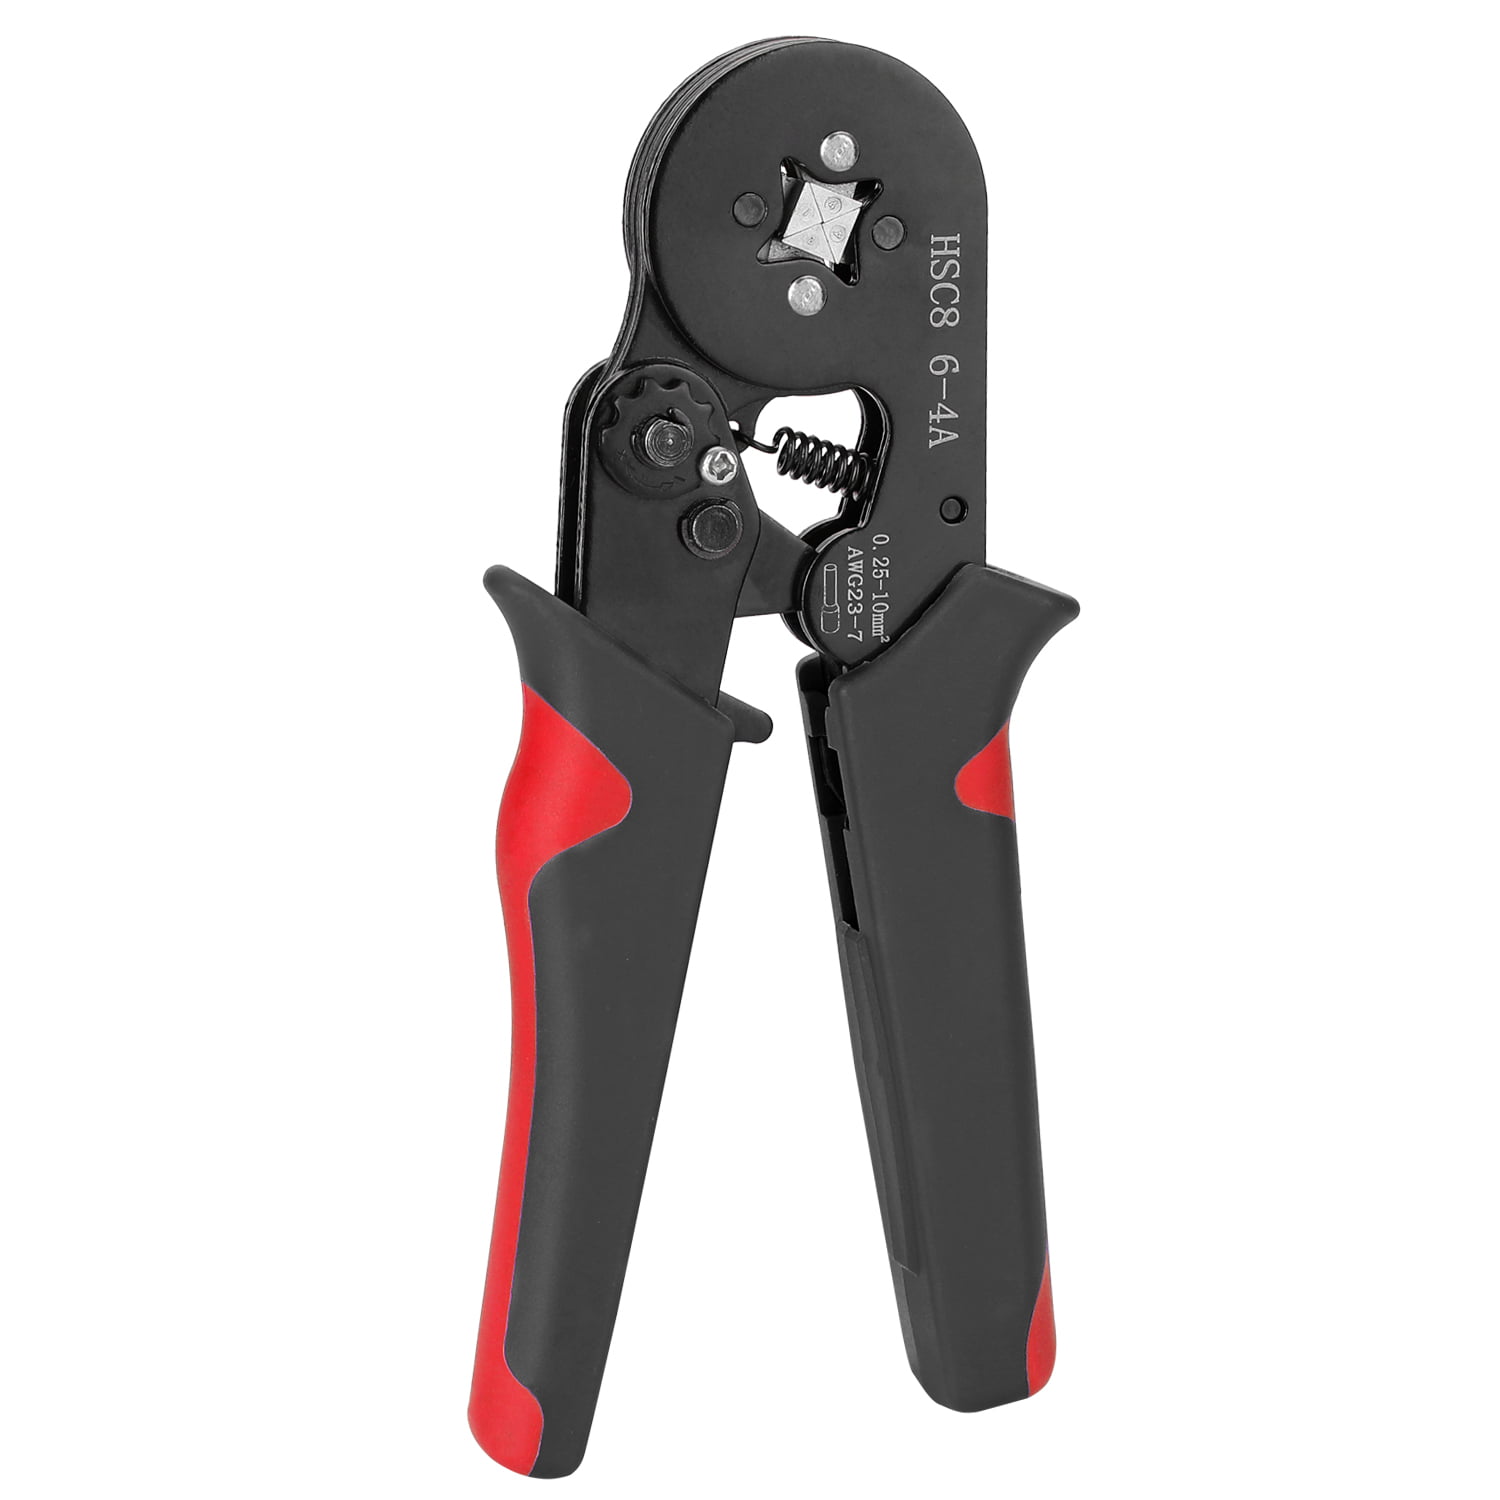 HSC8 6-4 Self-adjusting Crimping Plier for Cable End Sleeves Ferrules 